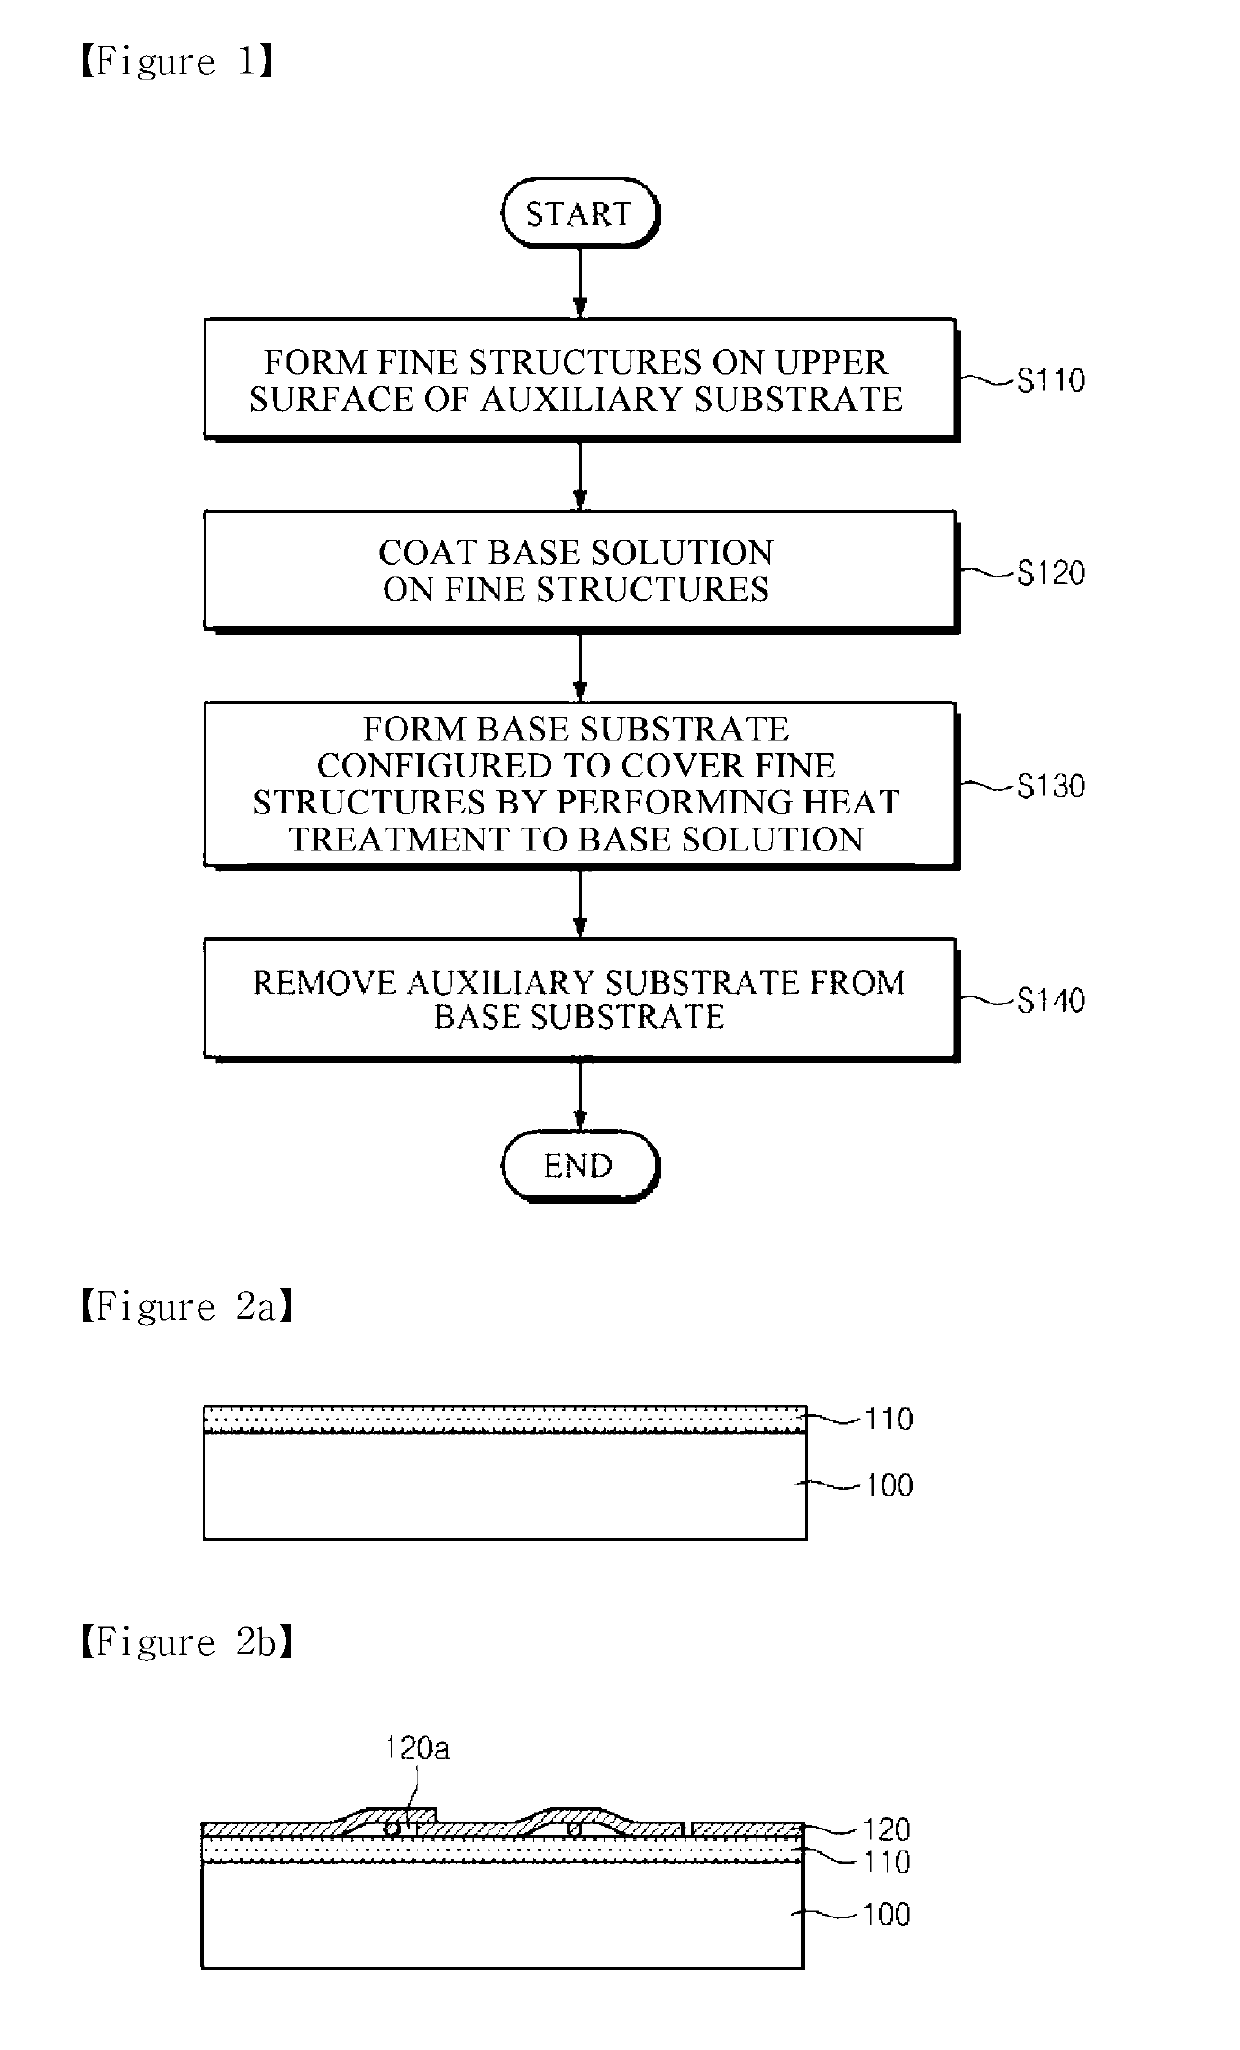 Substrate Including Nano/Micro Structure, Method for Manufacturing the Same, Method for Refining Nano/Micro Structure, Method for Manufacturing Nano/Micro Structure Network, and Manufacturing Apparatus Therefor